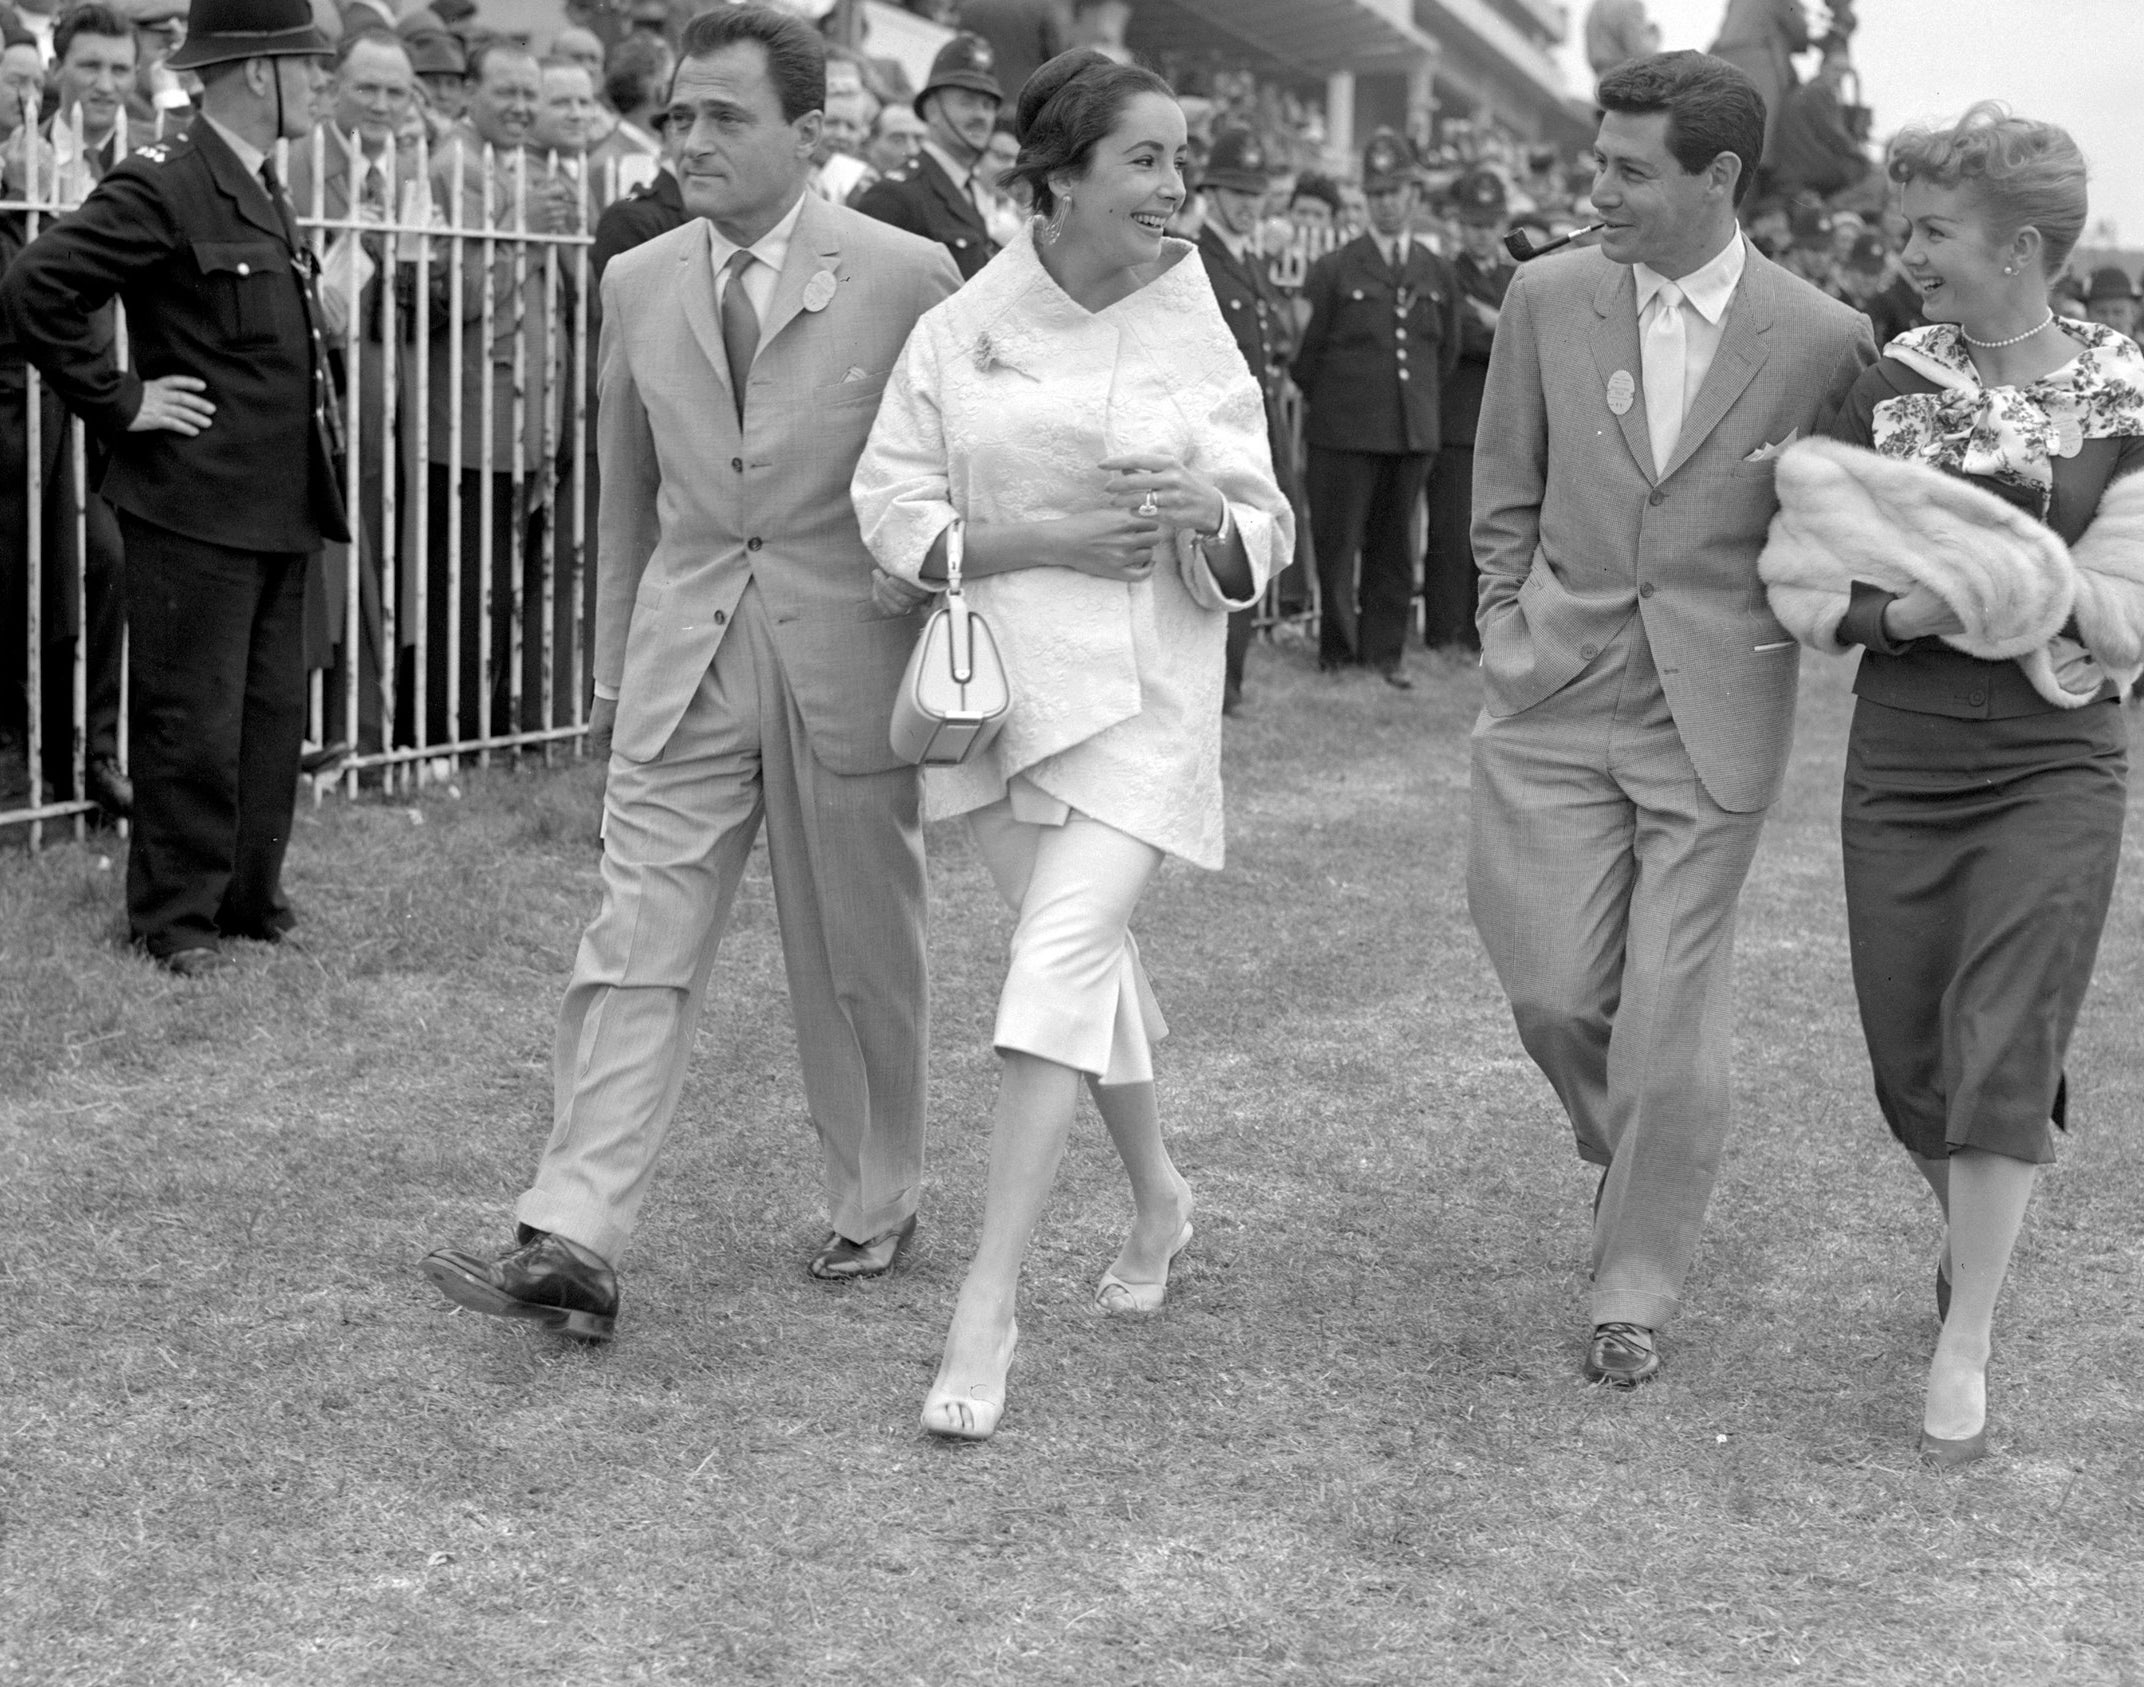 the two couples stroll together at a horse derby